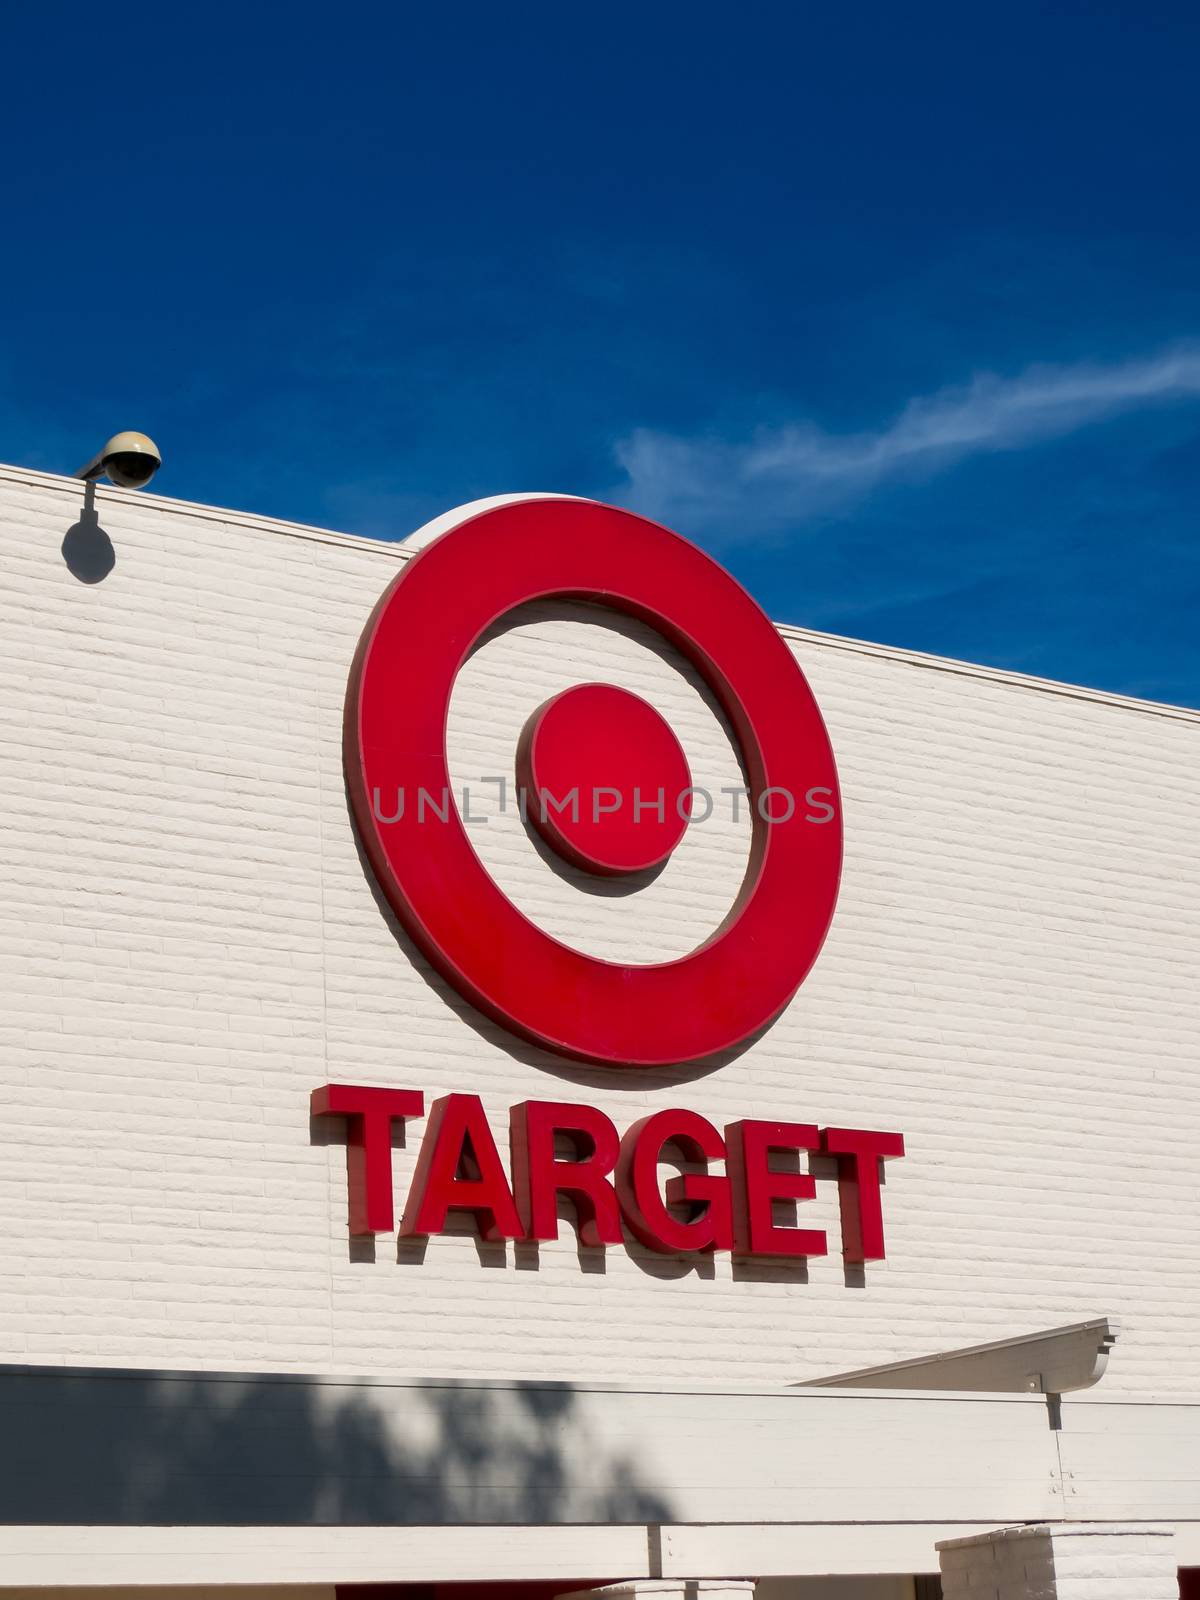 SANTA CLARITA,, CA/USA - NOVEMBER 22, 2014  Exterior view of a Target retail store. Target Corporation is an American retailing company and second-largest discount retailer in the United States.